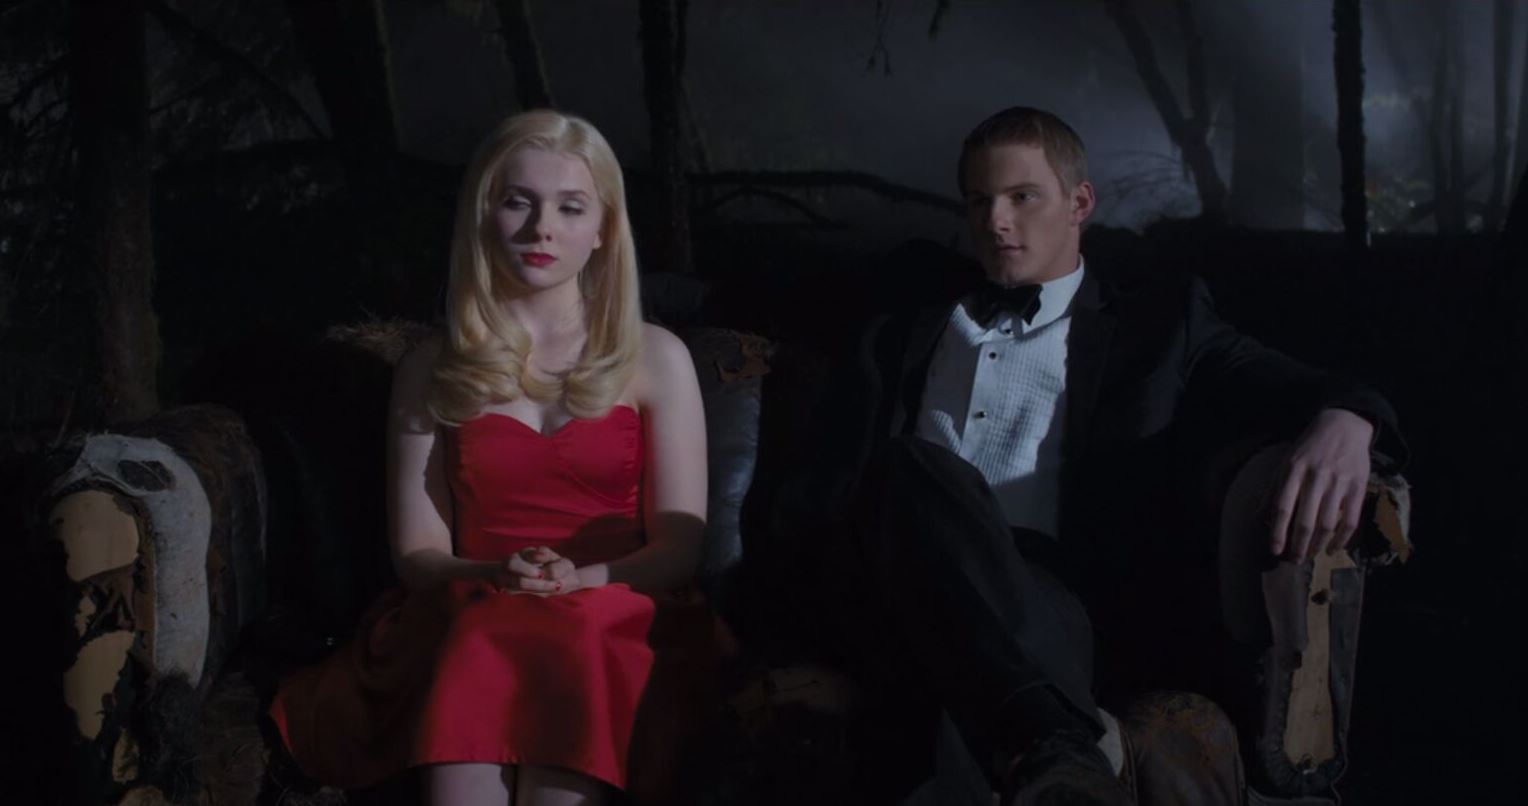 Abigail Breslin and Alexander Ludwig go on a date in the woods in Final Girl (2015)